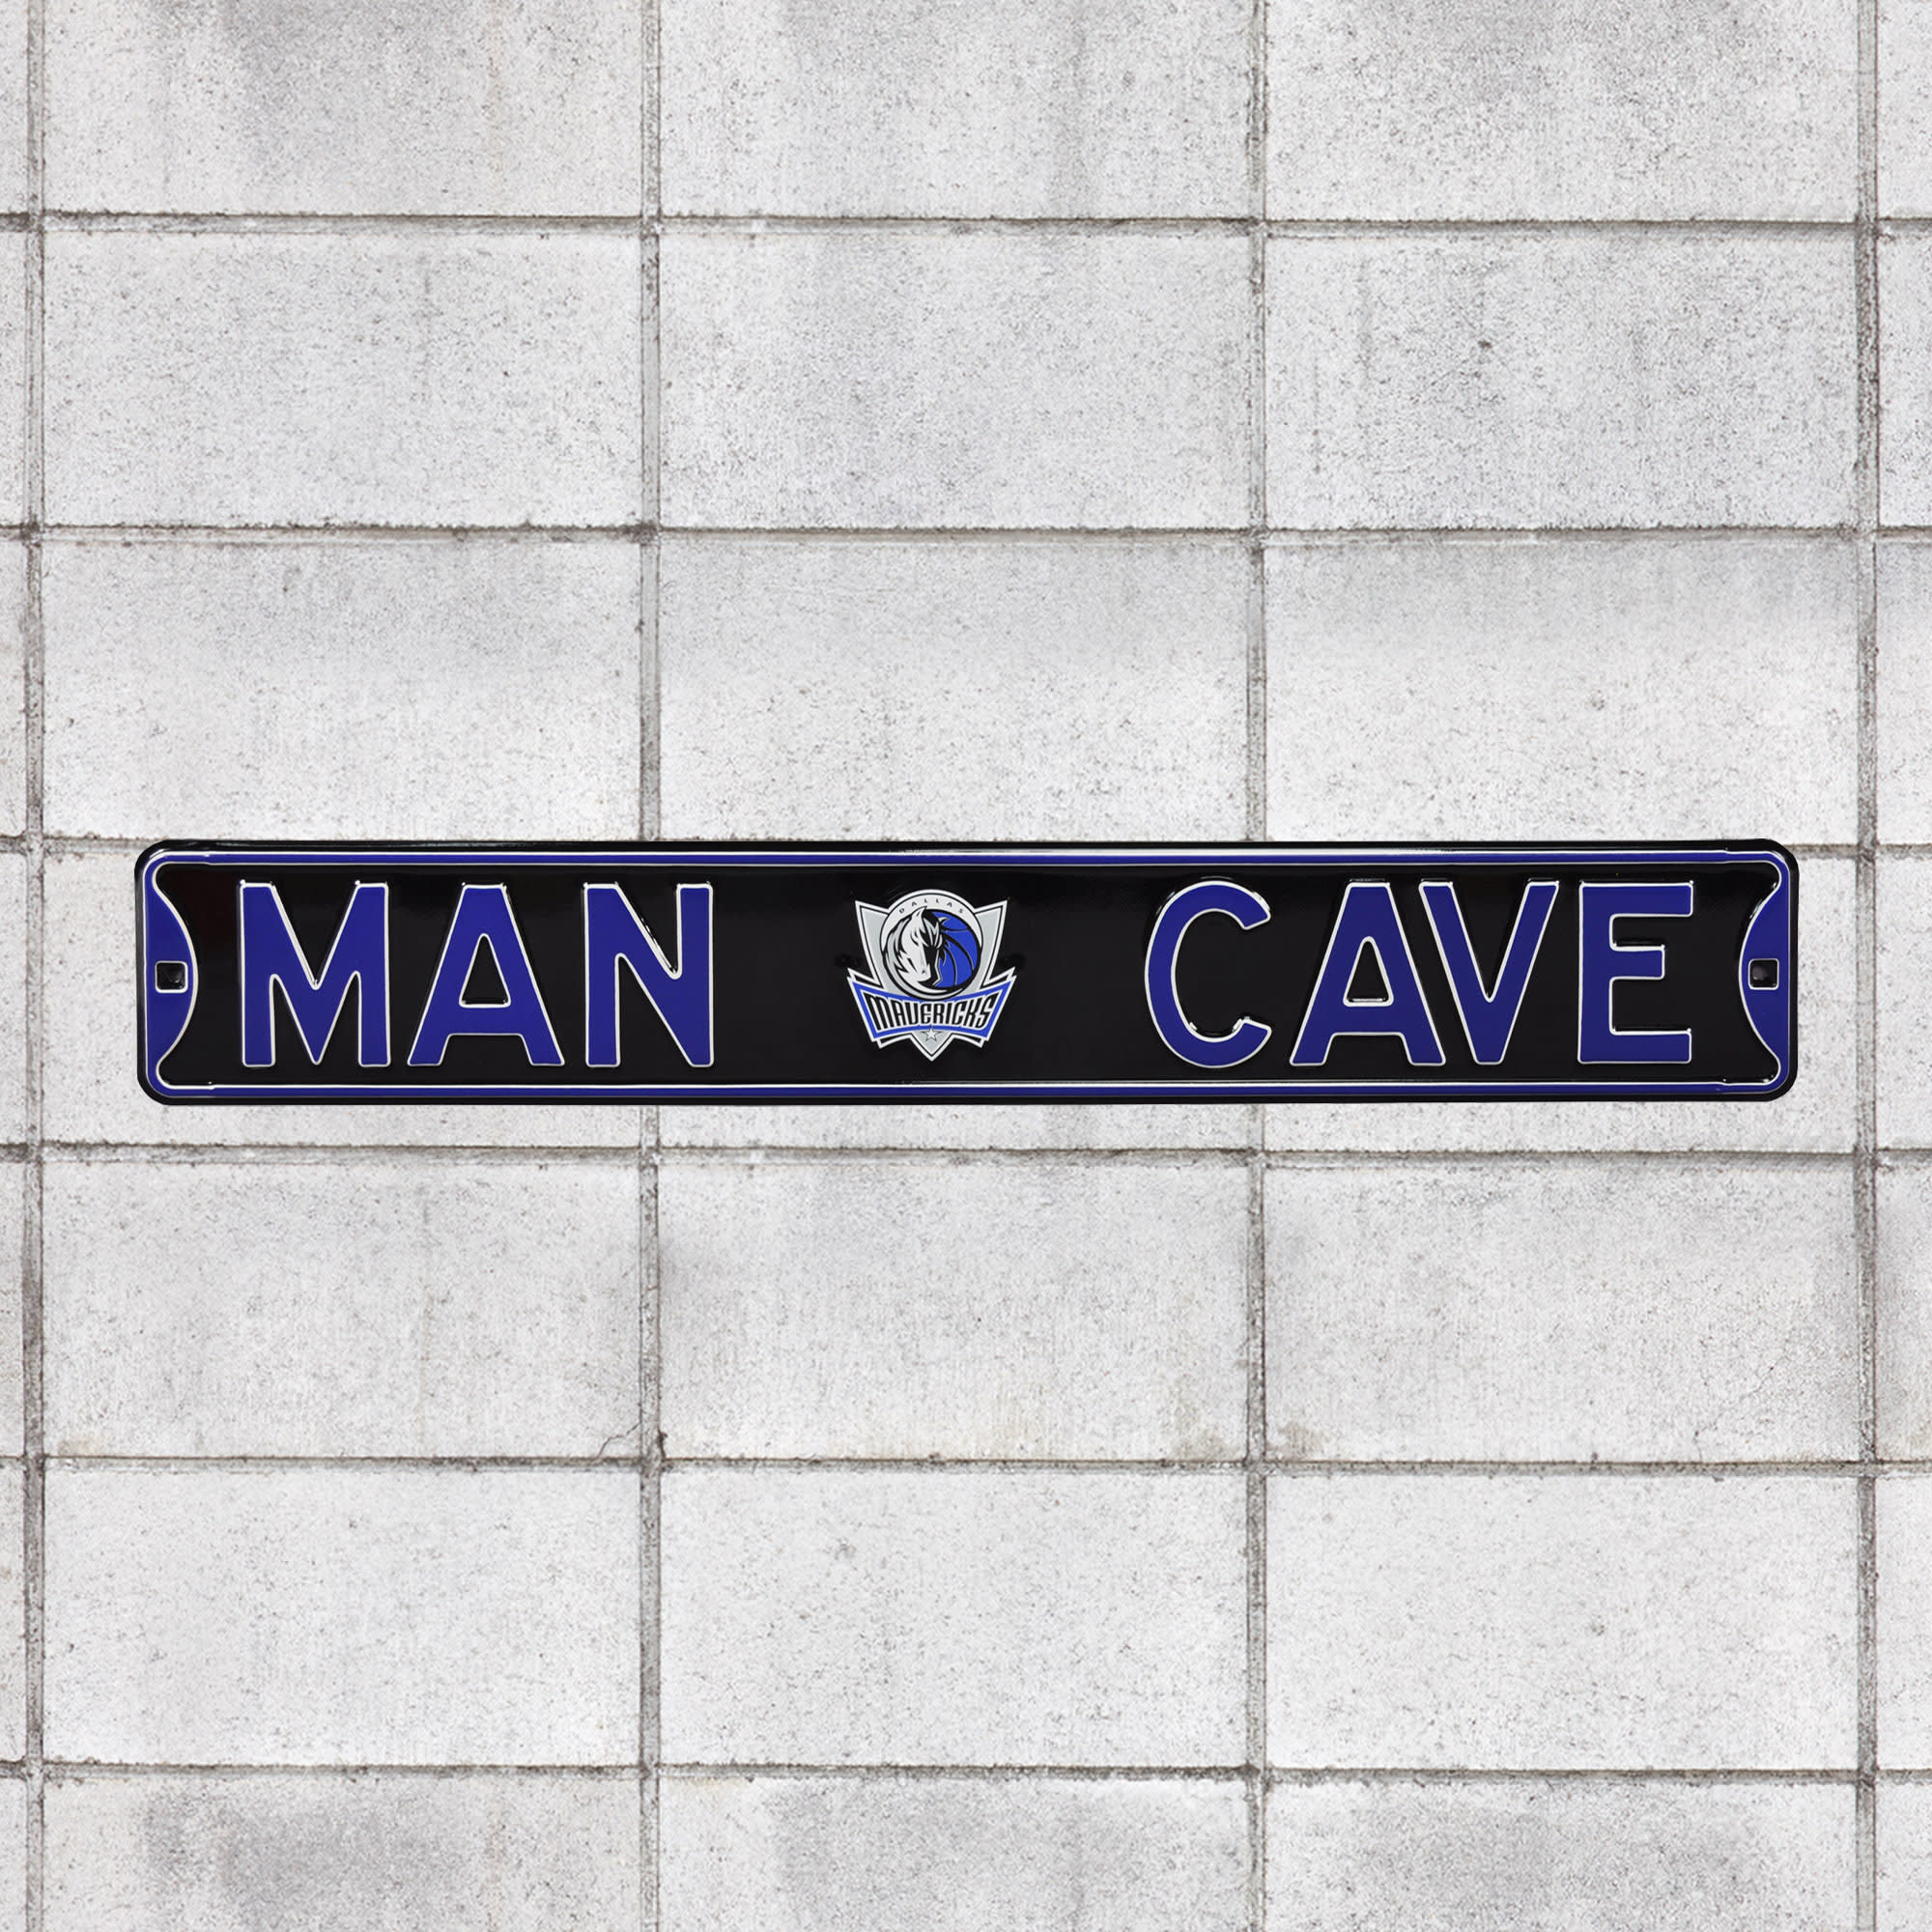 Dallas Mavericks: Man Cave - Officially Licensed NBA Metal Street Sign 36.0"W x 6.0"H by Fathead | 100% Steel